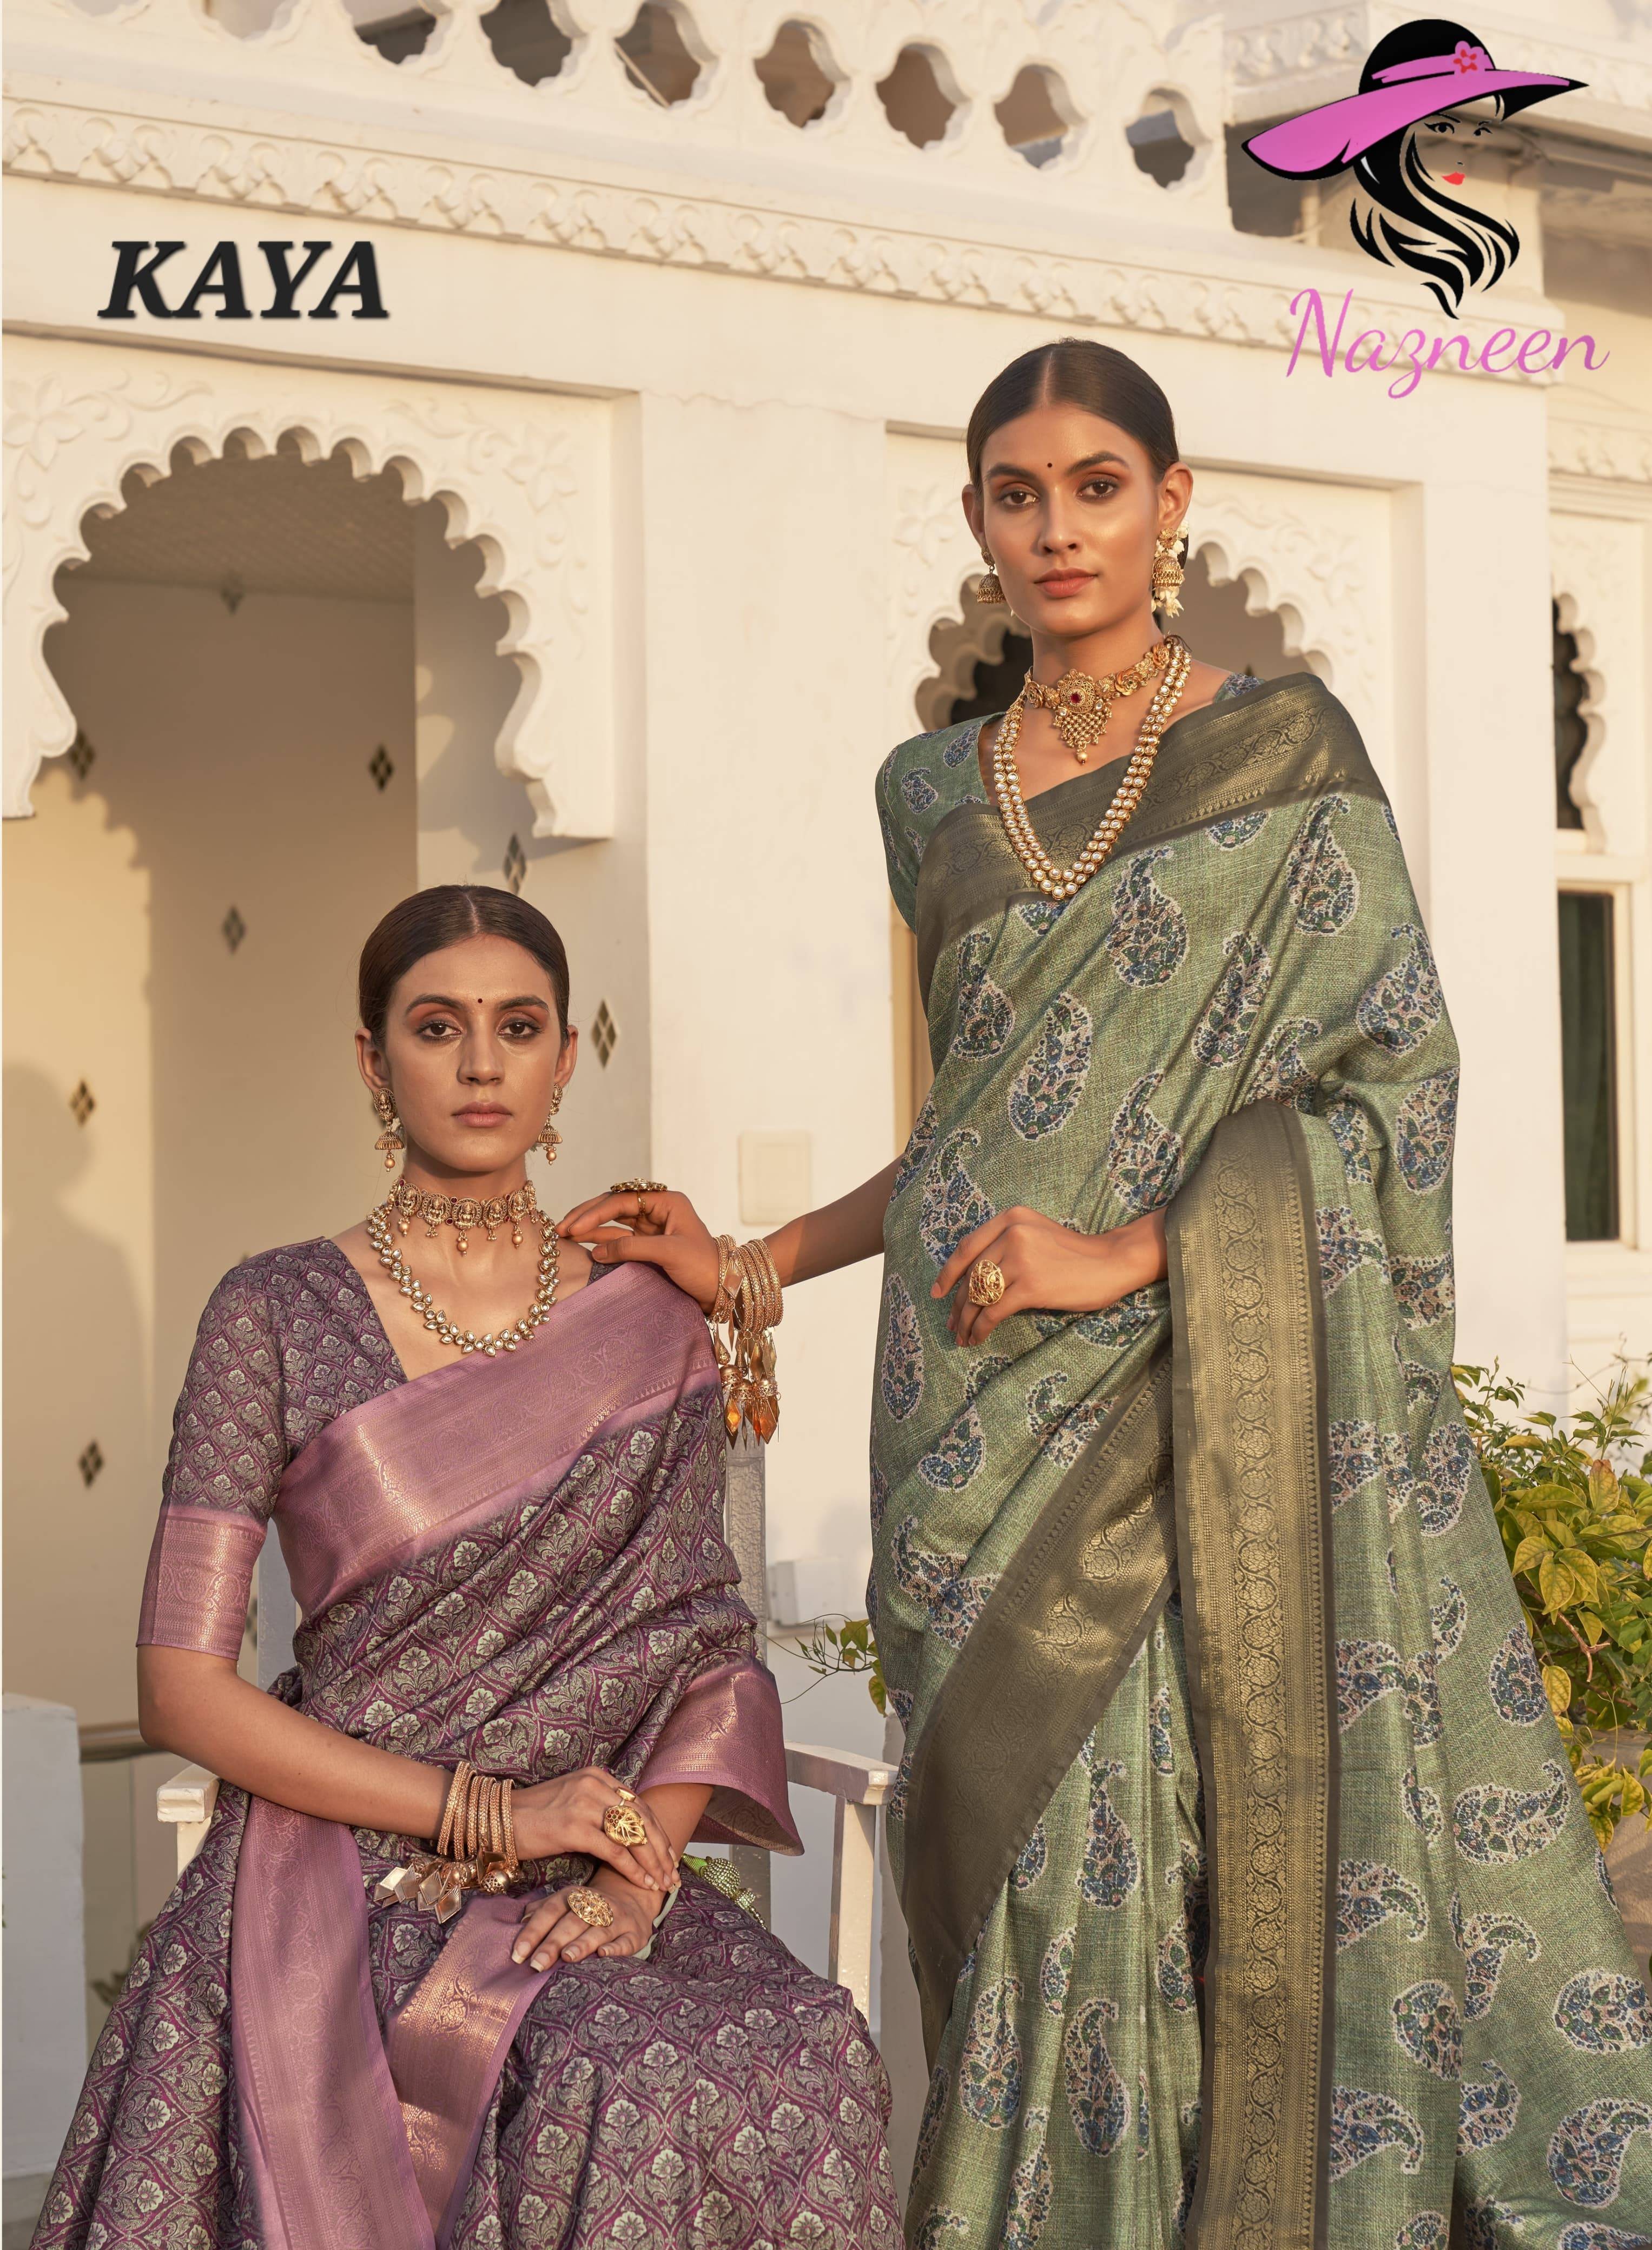 Kaya By Nazneen 4541 To 4549 Series Indian Traditional Wear Collection Beautiful Stylish Fancy Colorful Party Wear & Occasional Wear Khadi Silk Sarees At Wholesale Price